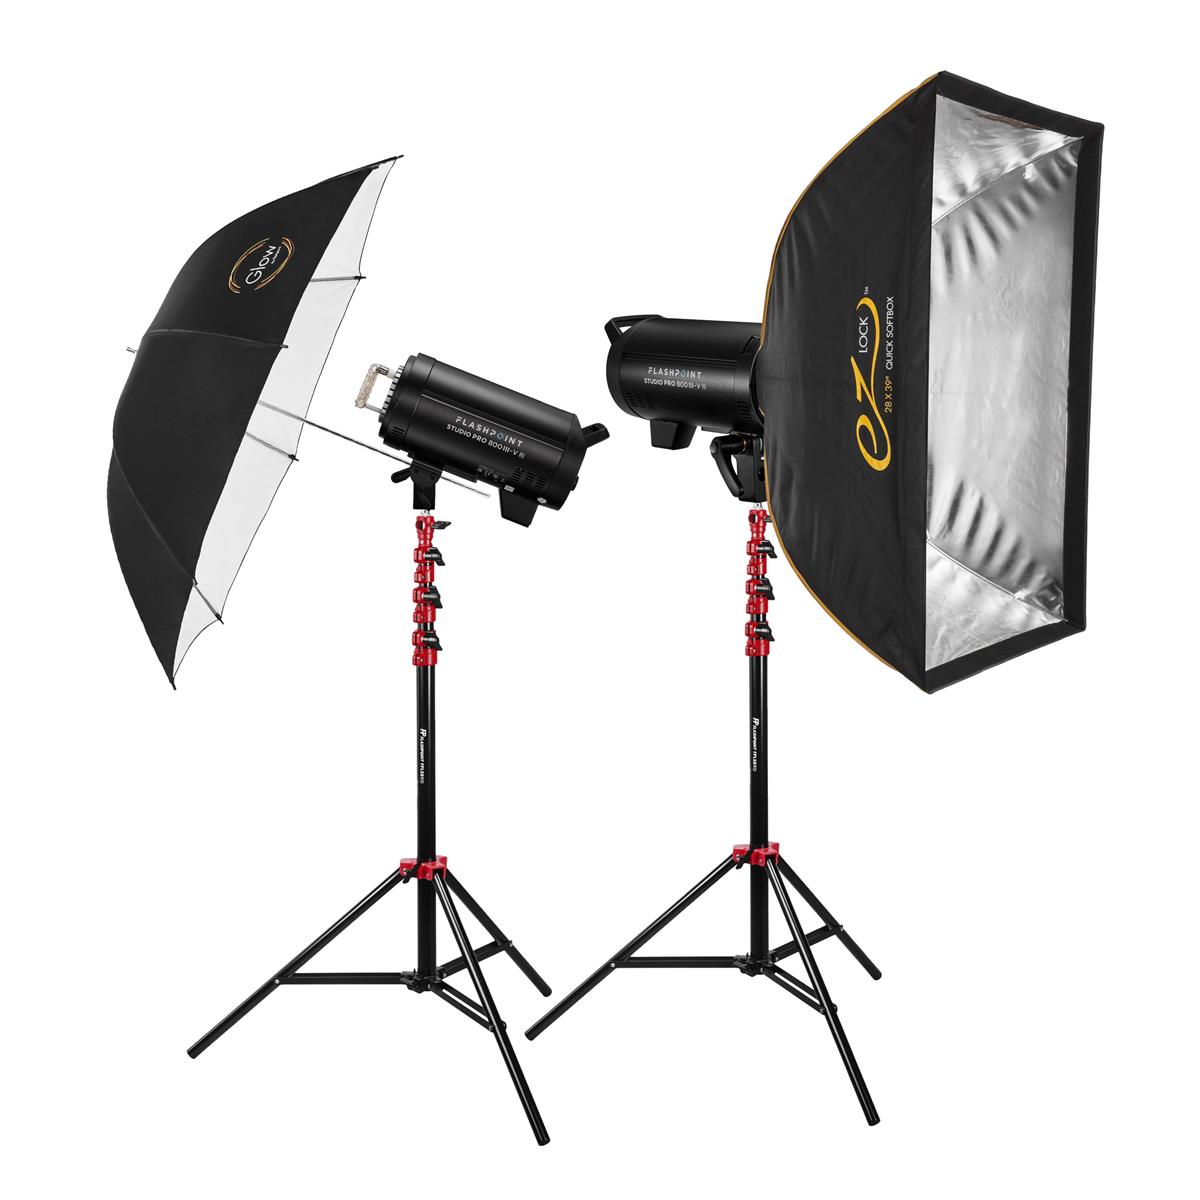 Image of Flashpoint Studio Pro 800 III-V R2 2-Light Kit with Stands